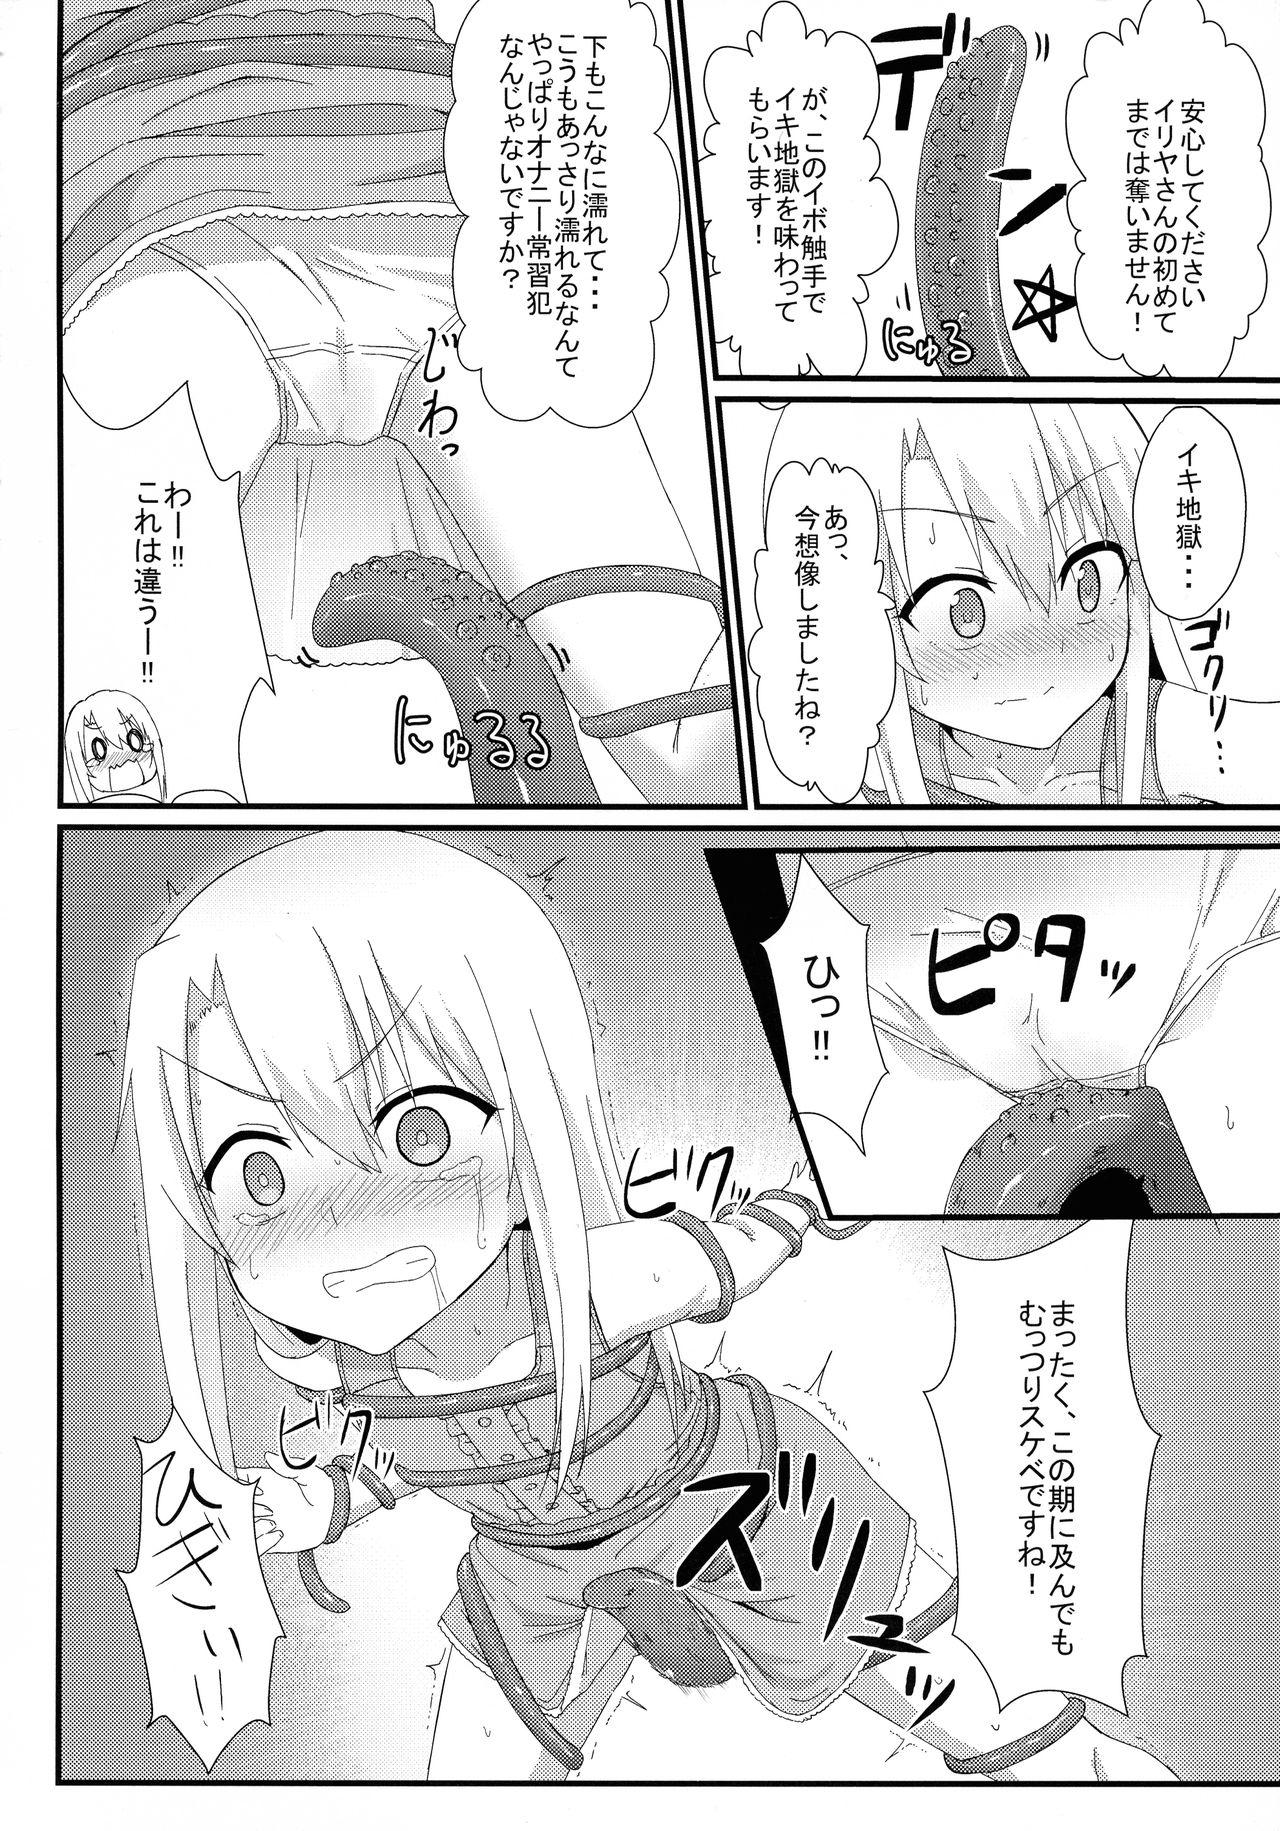 Wives Illya to Ruby Etchi Etchi Secret Function - Fate kaleid liner prisma illya Pegging - Page 6